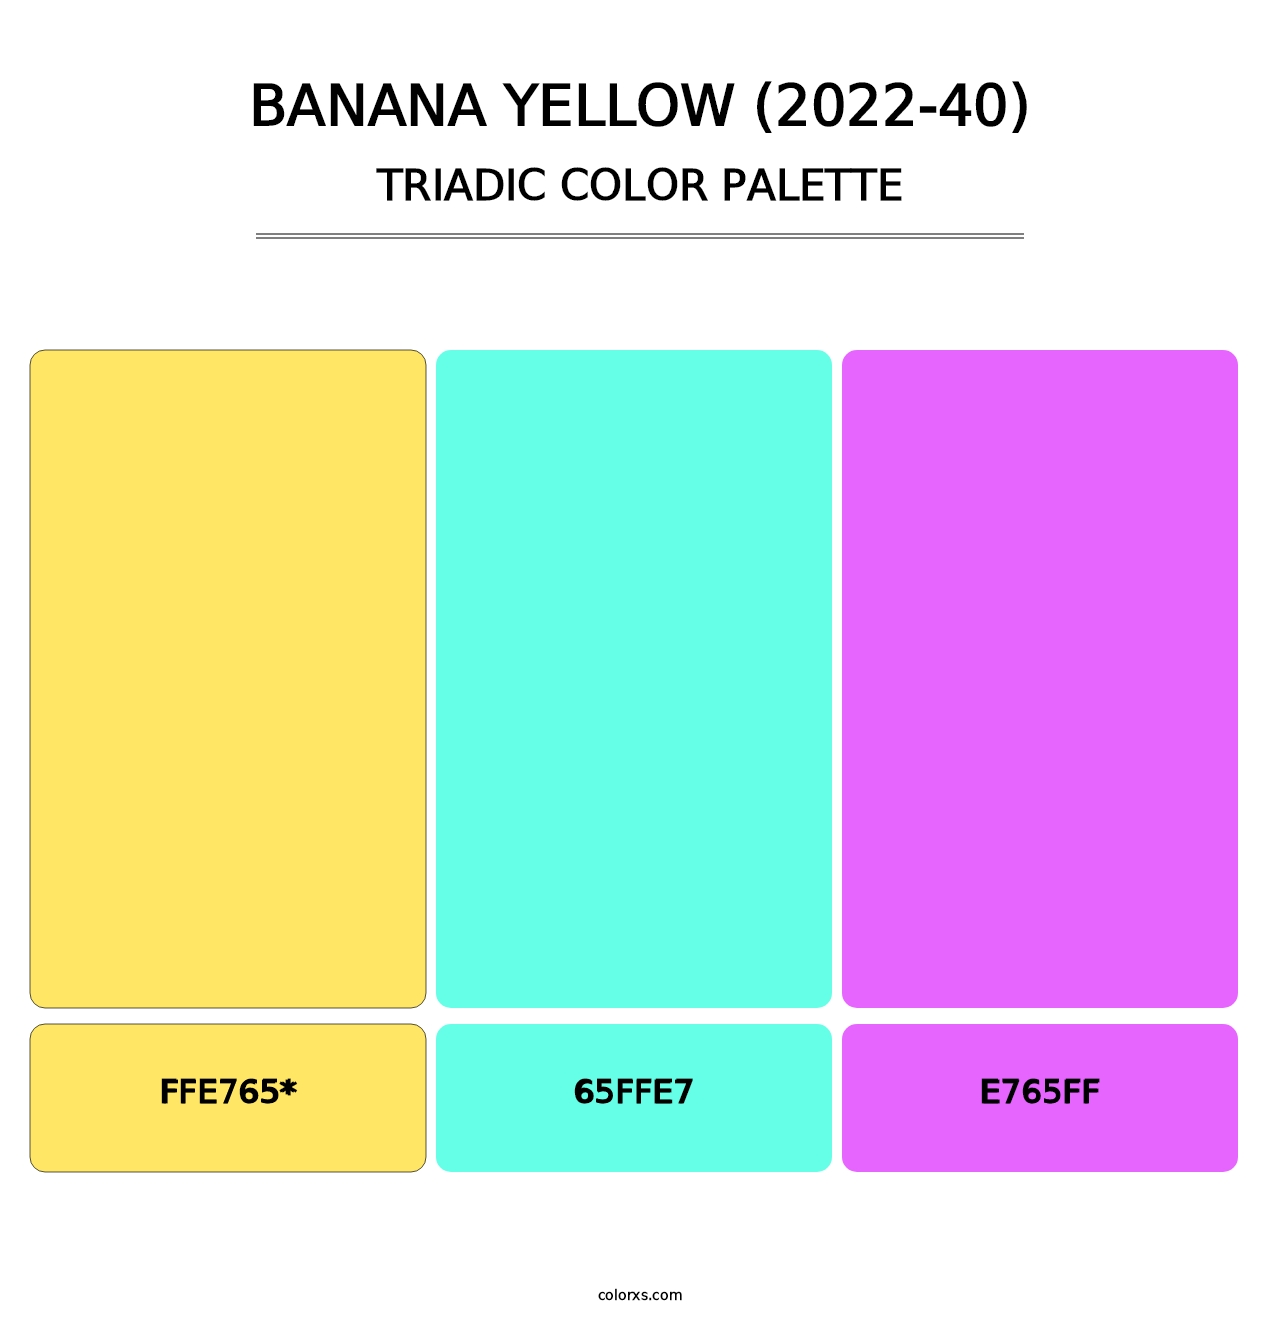 Banana Yellow (2022-40) - Triadic Color Palette